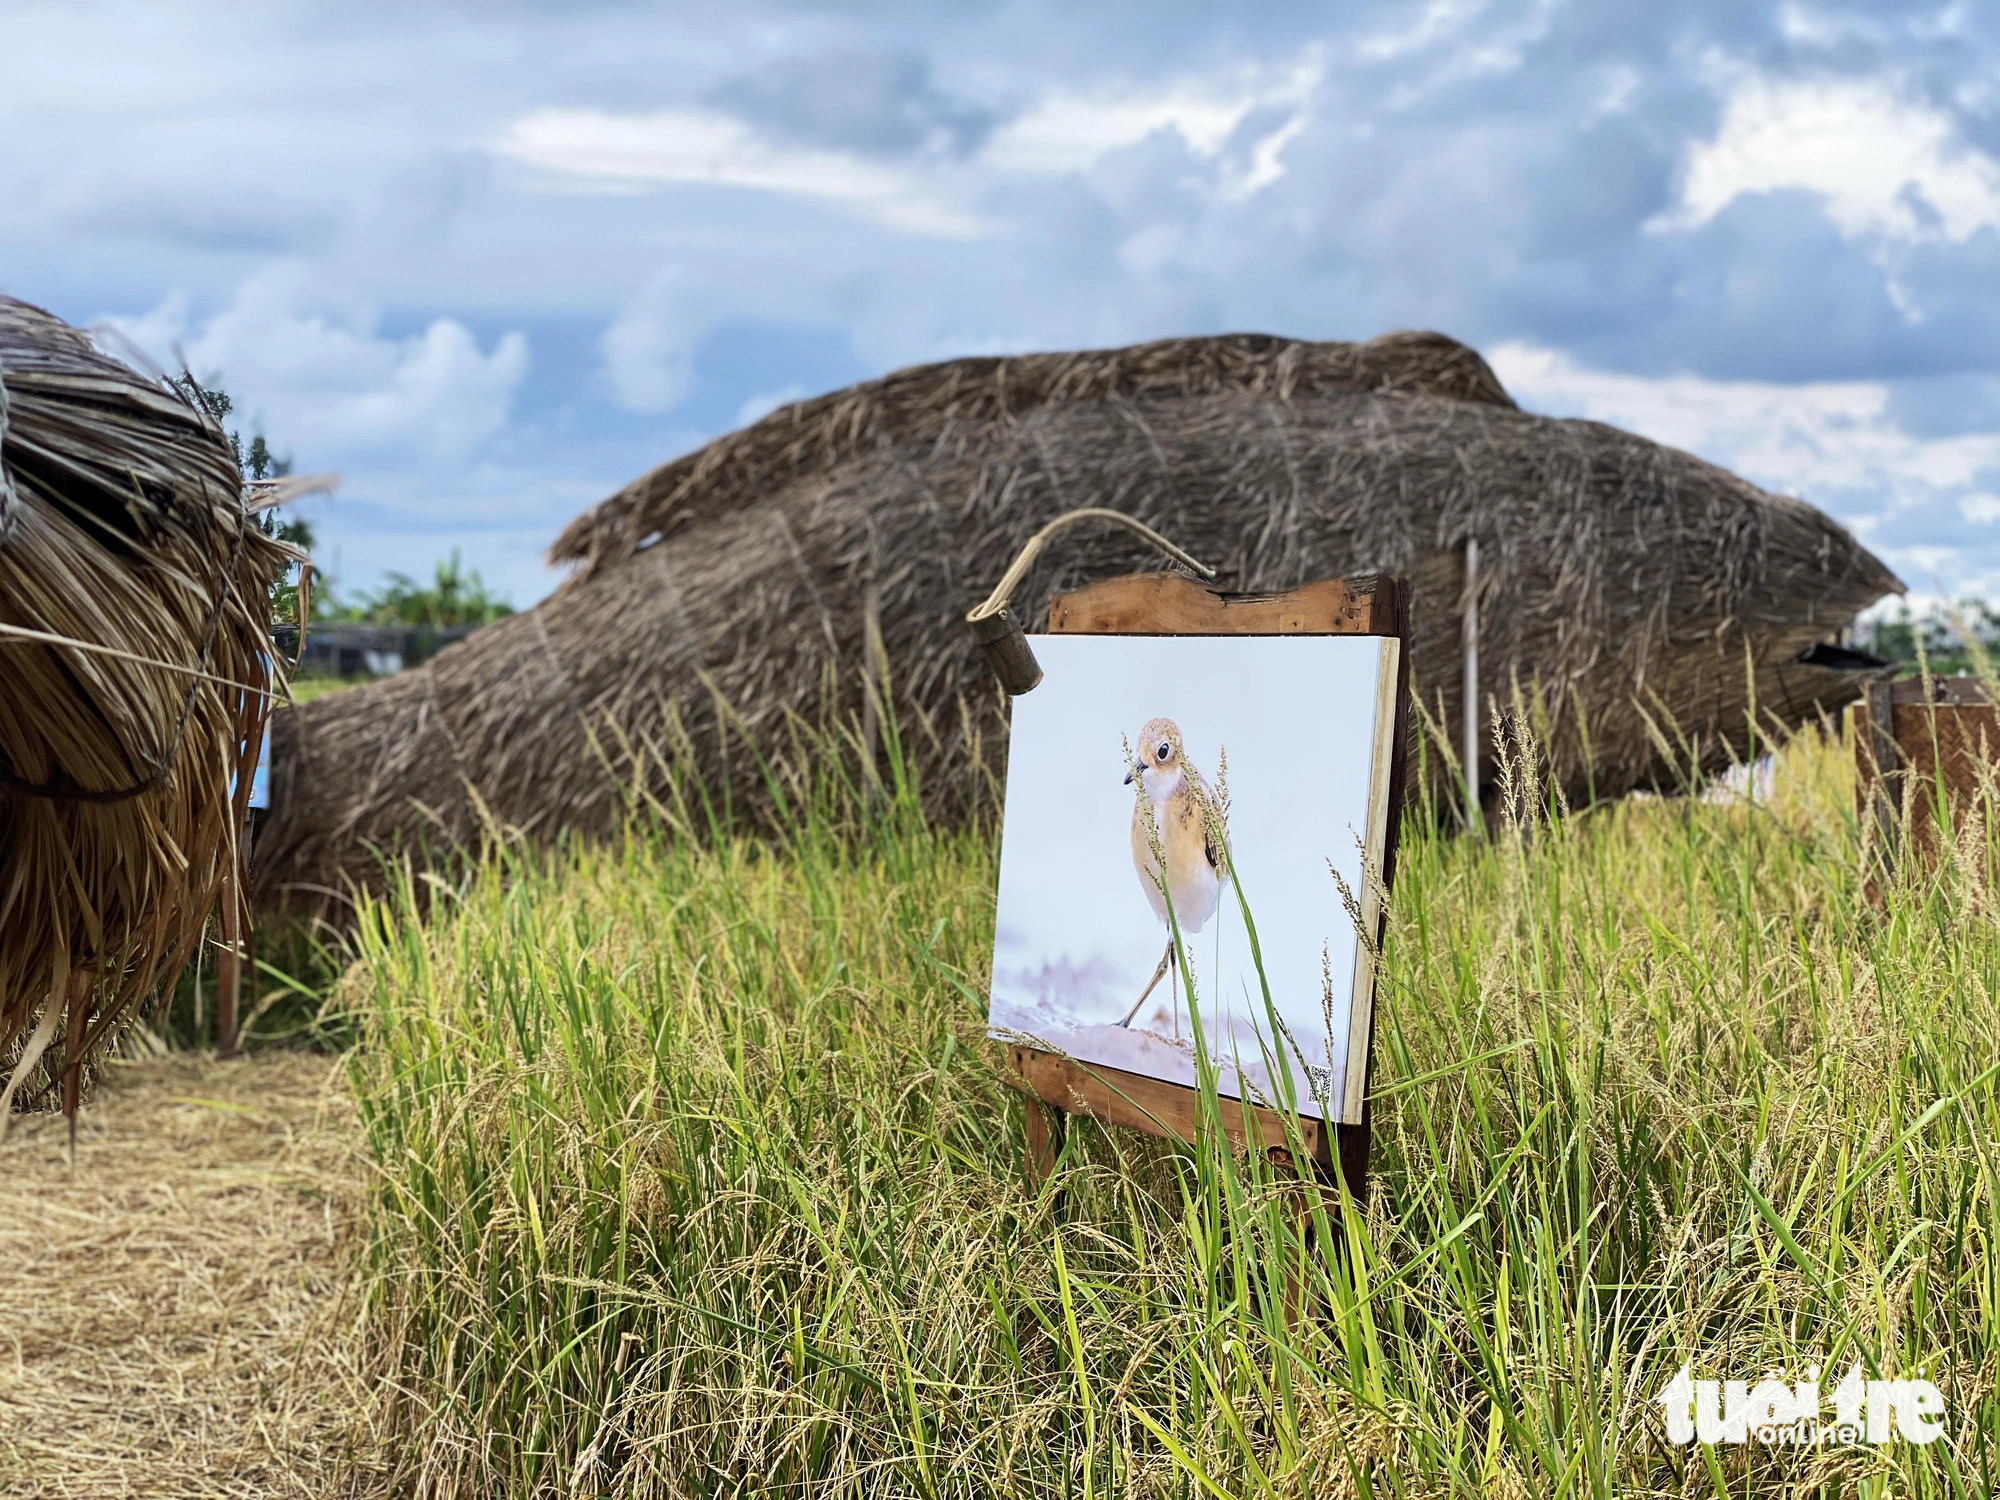 Wildlife photo exhibit in Hoi An spreads message on environmental protection